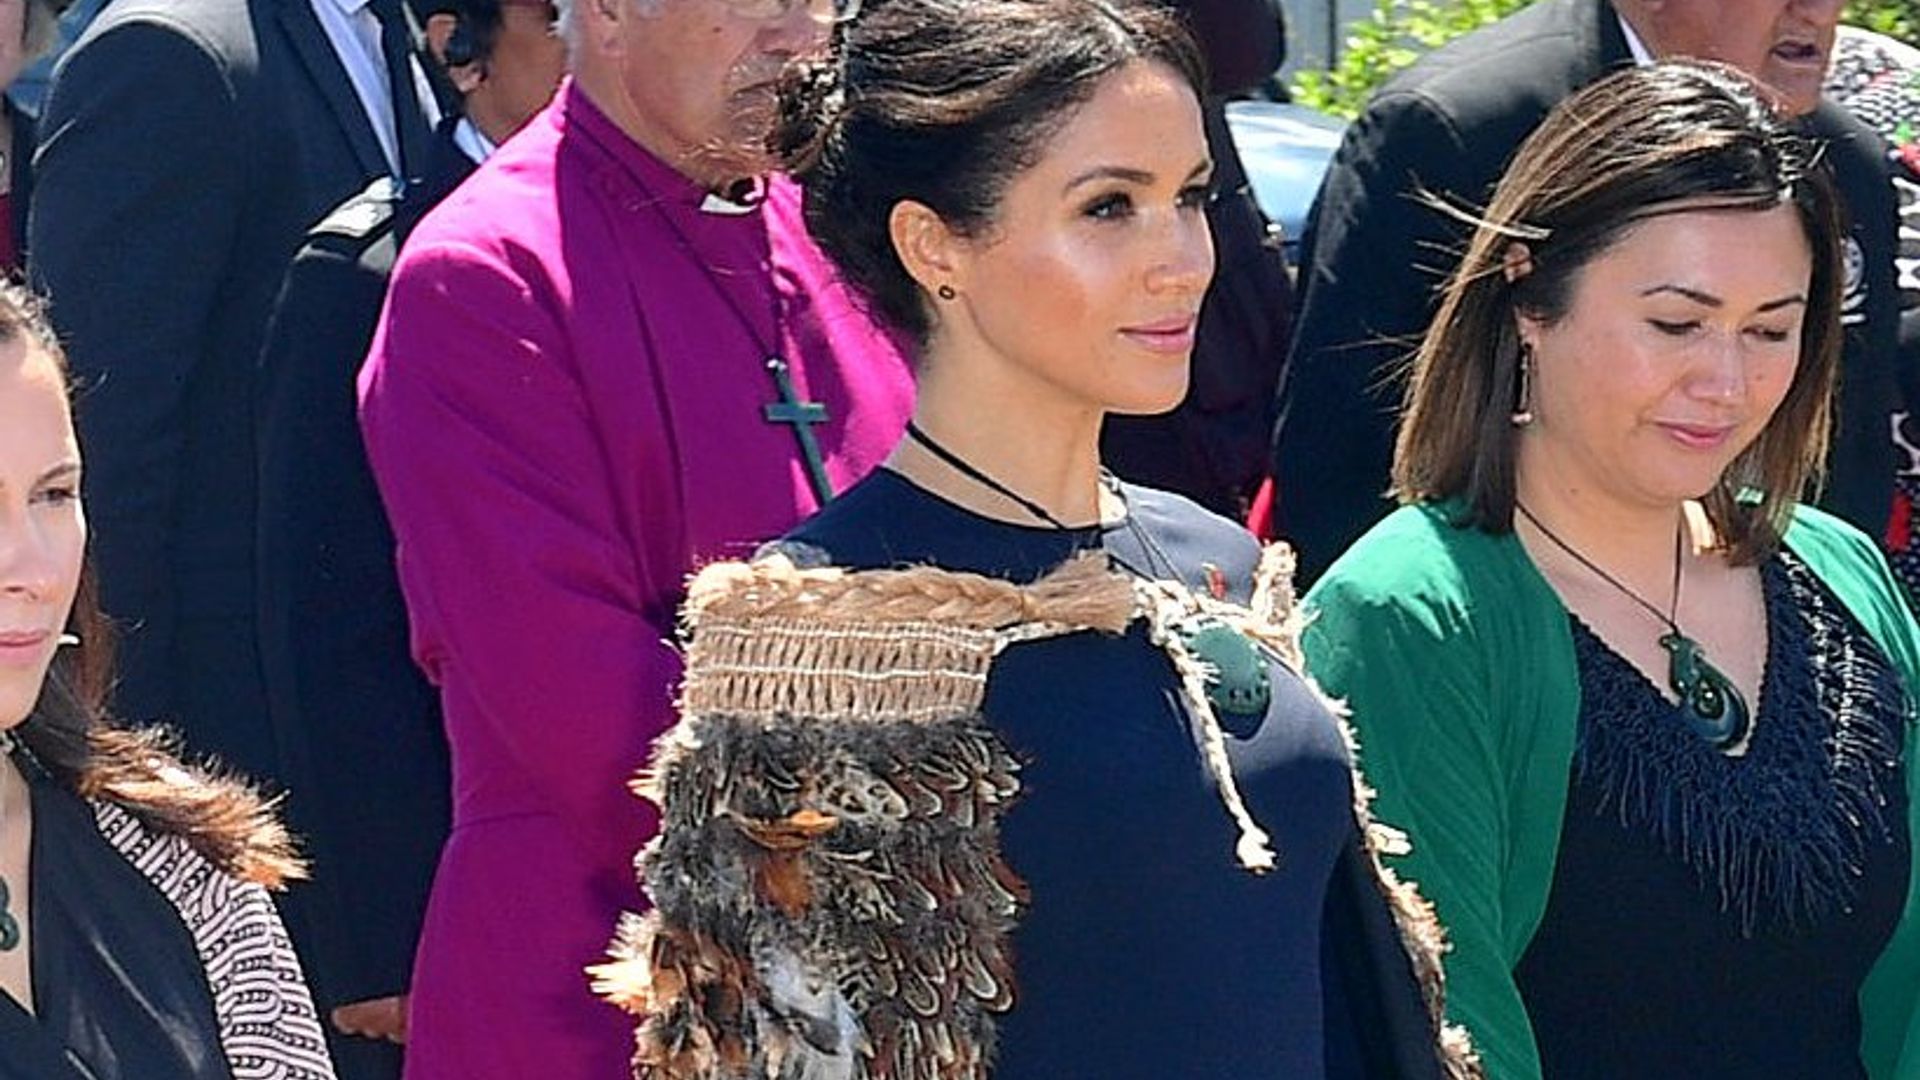 Meghan Markle wears a necklace with a very special meaning on the final day of the royal tour